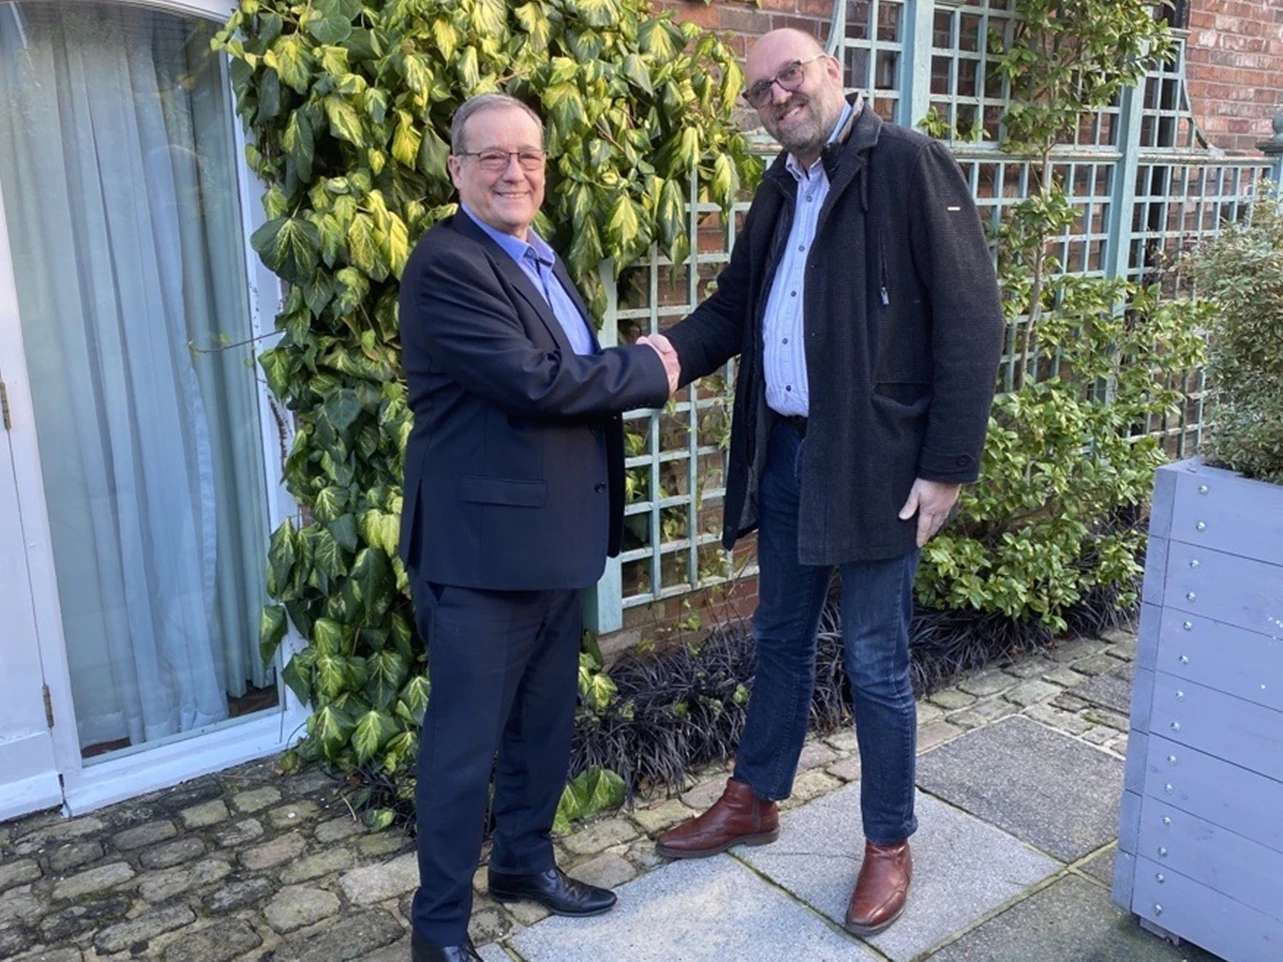 Left to right is Graham Crich, vice president of EMEA Partner Services at Veeam with Richard May, managing director at virtualDCS.